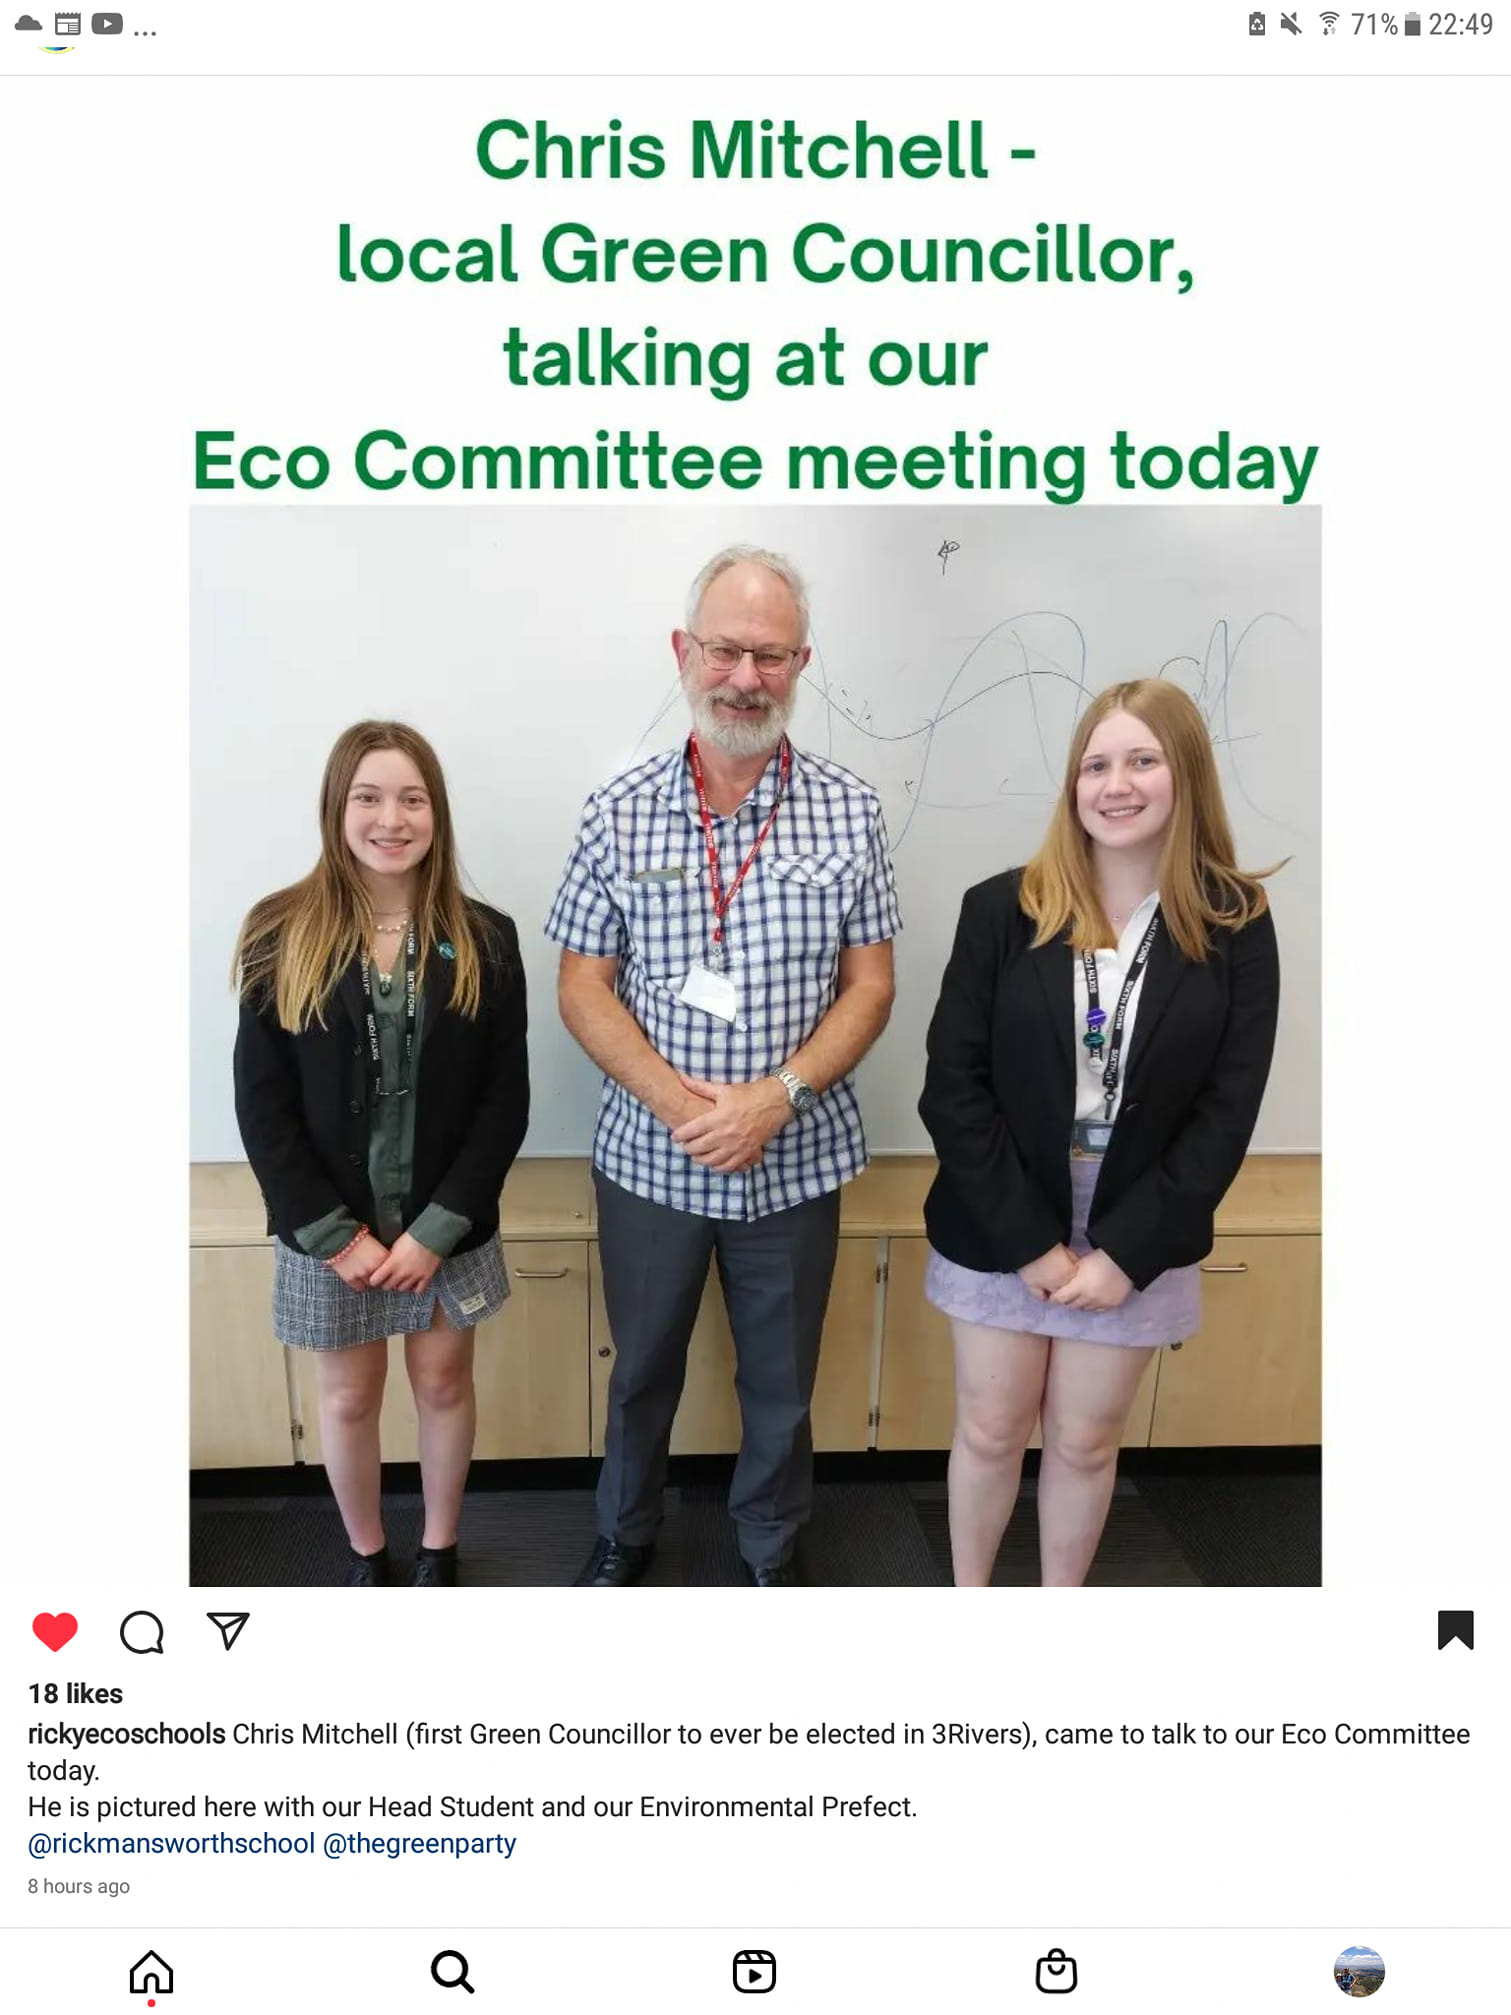 Screenshot from Ricky School social media. Chris stands in between two school girls smiling. The caption reads "Chris Mitchell, local Green Councillor, talking at our Eco Committee meeting today